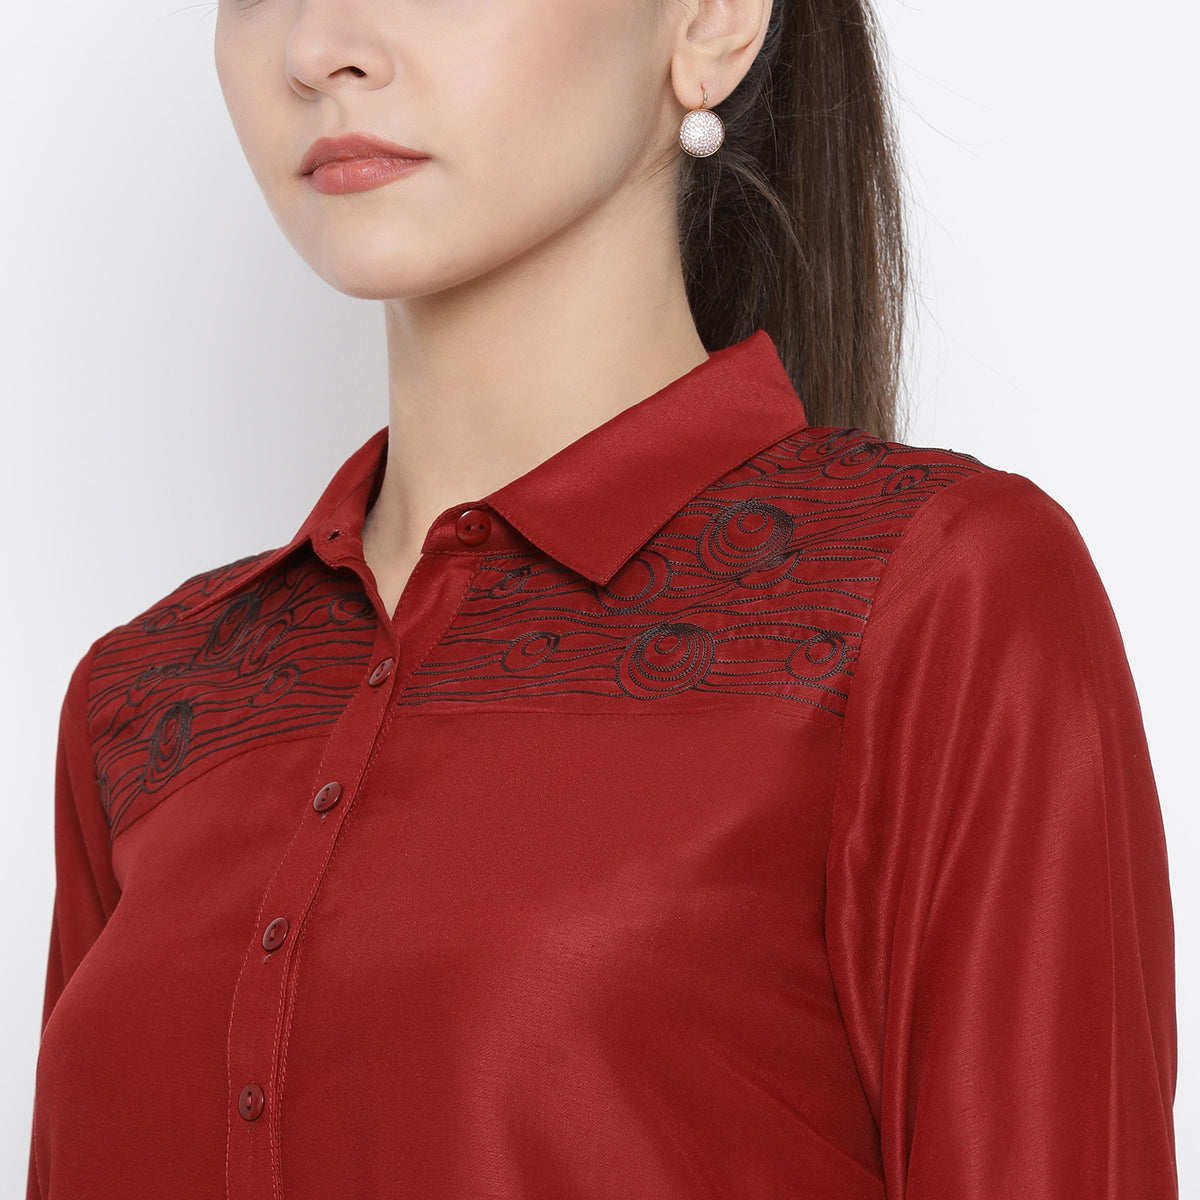 Red Top With Thread Embroidery On Yoke